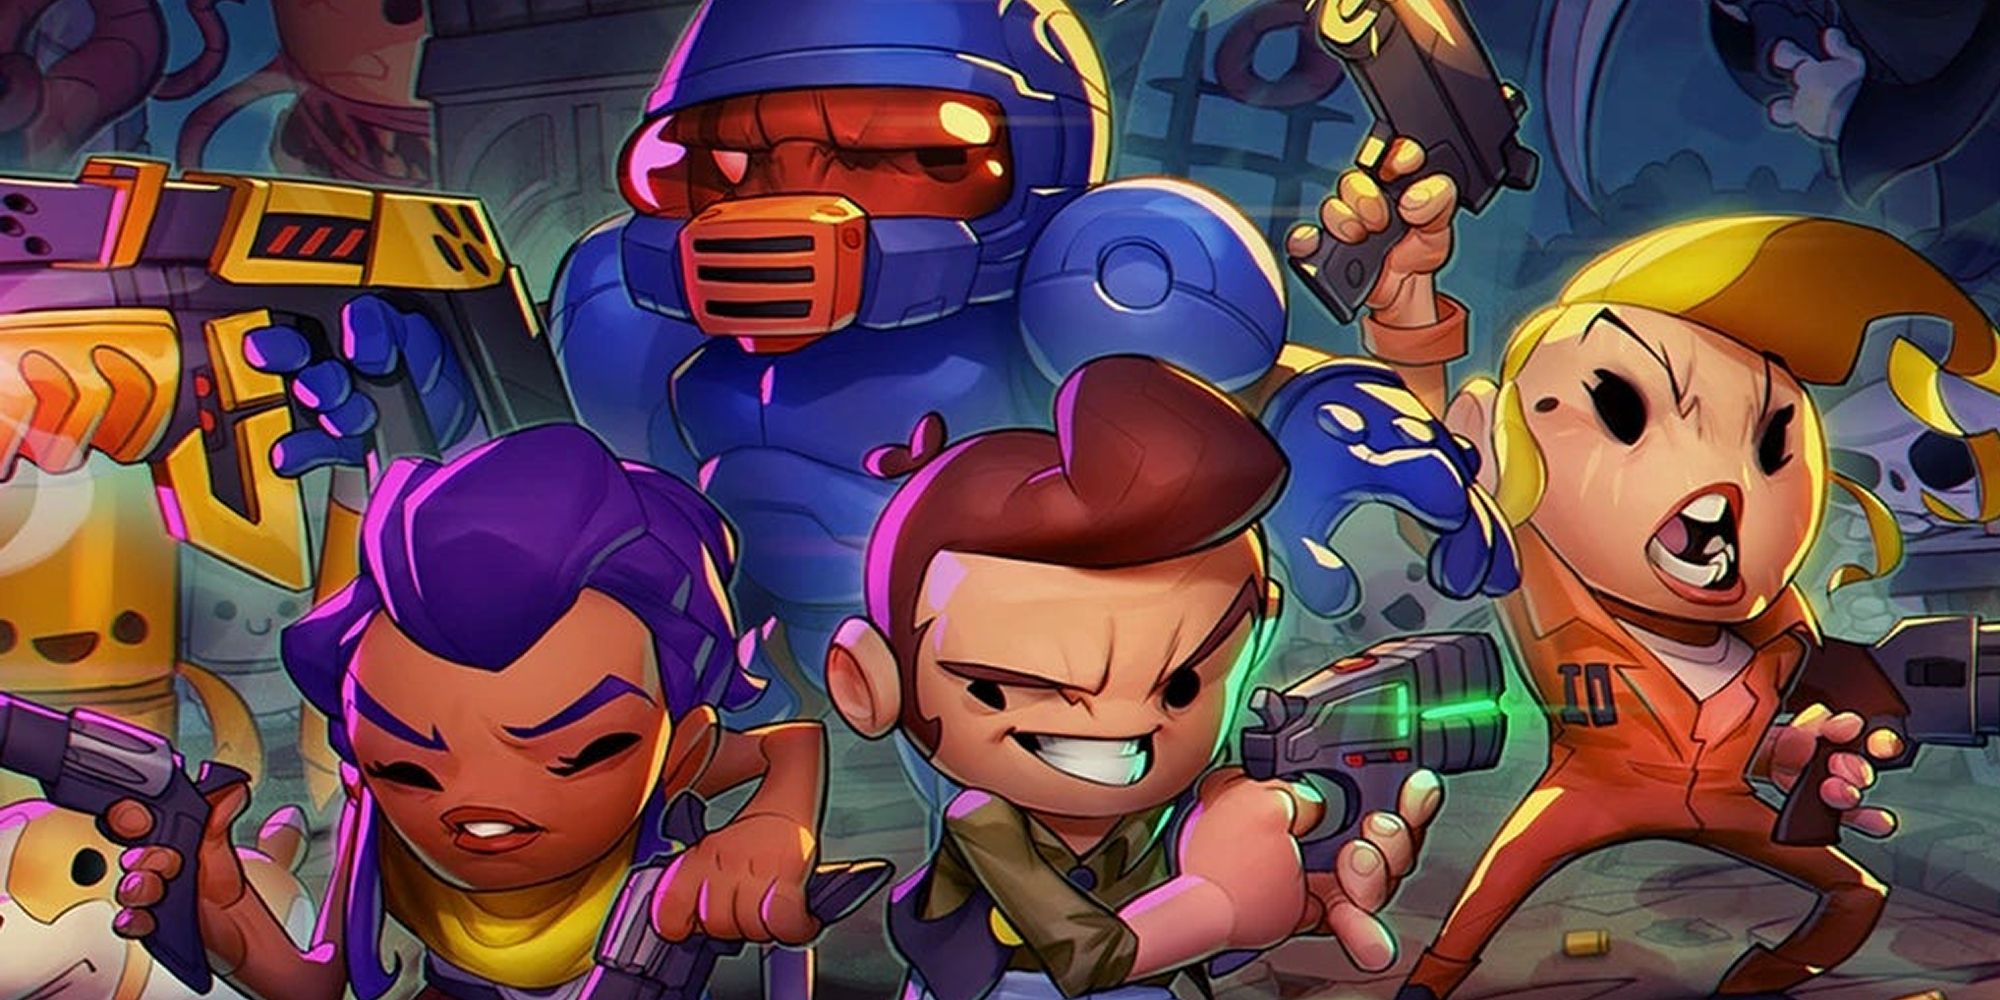 Enter The Gungeon Player Characters